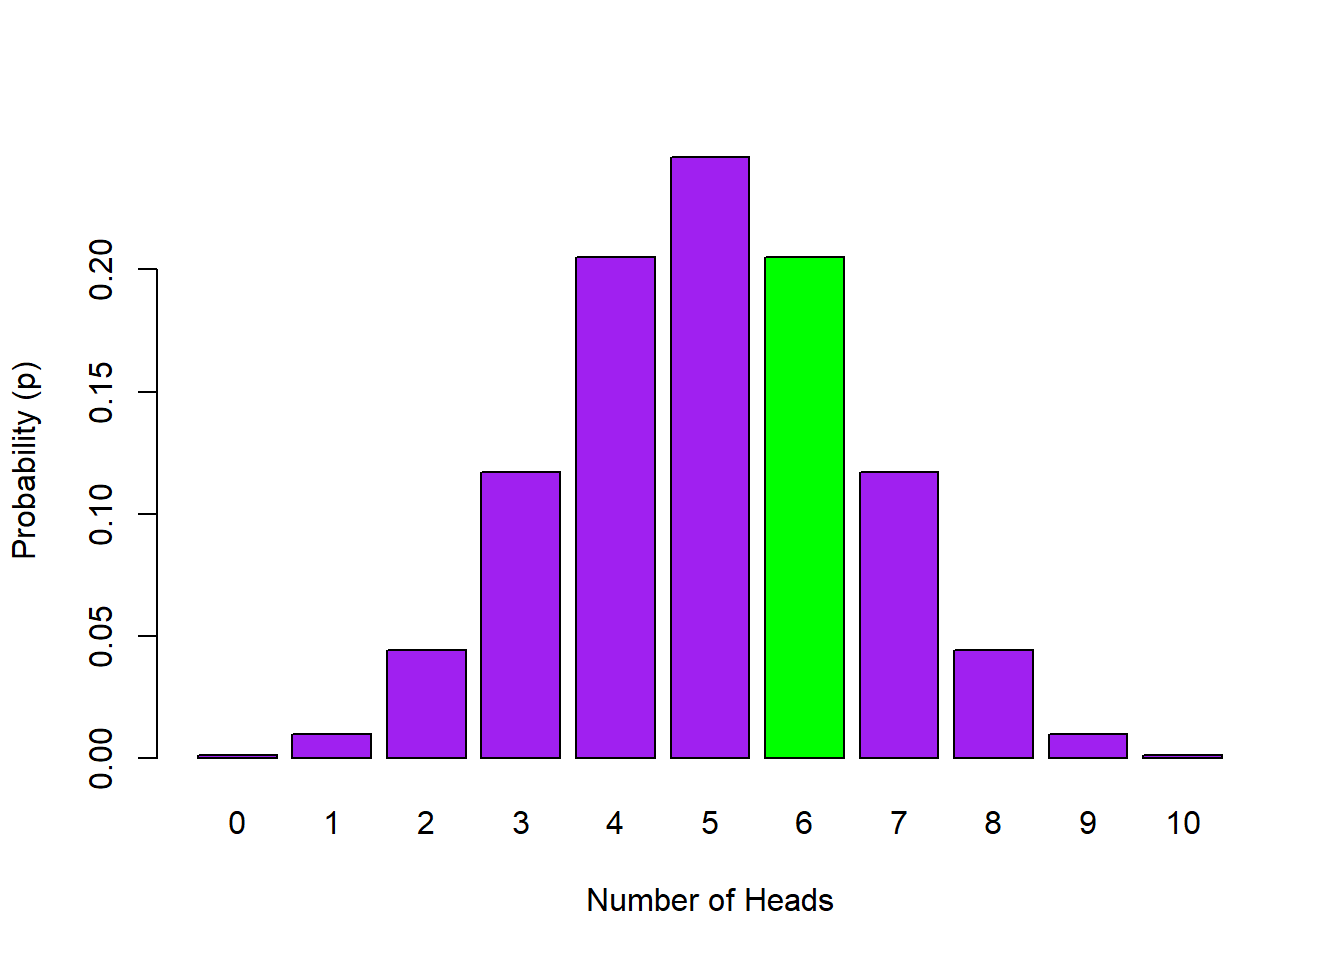 Probability Distribution of Number of Heads in 10 Flips with the probability of 6 out of 10 Heads highlighted in green